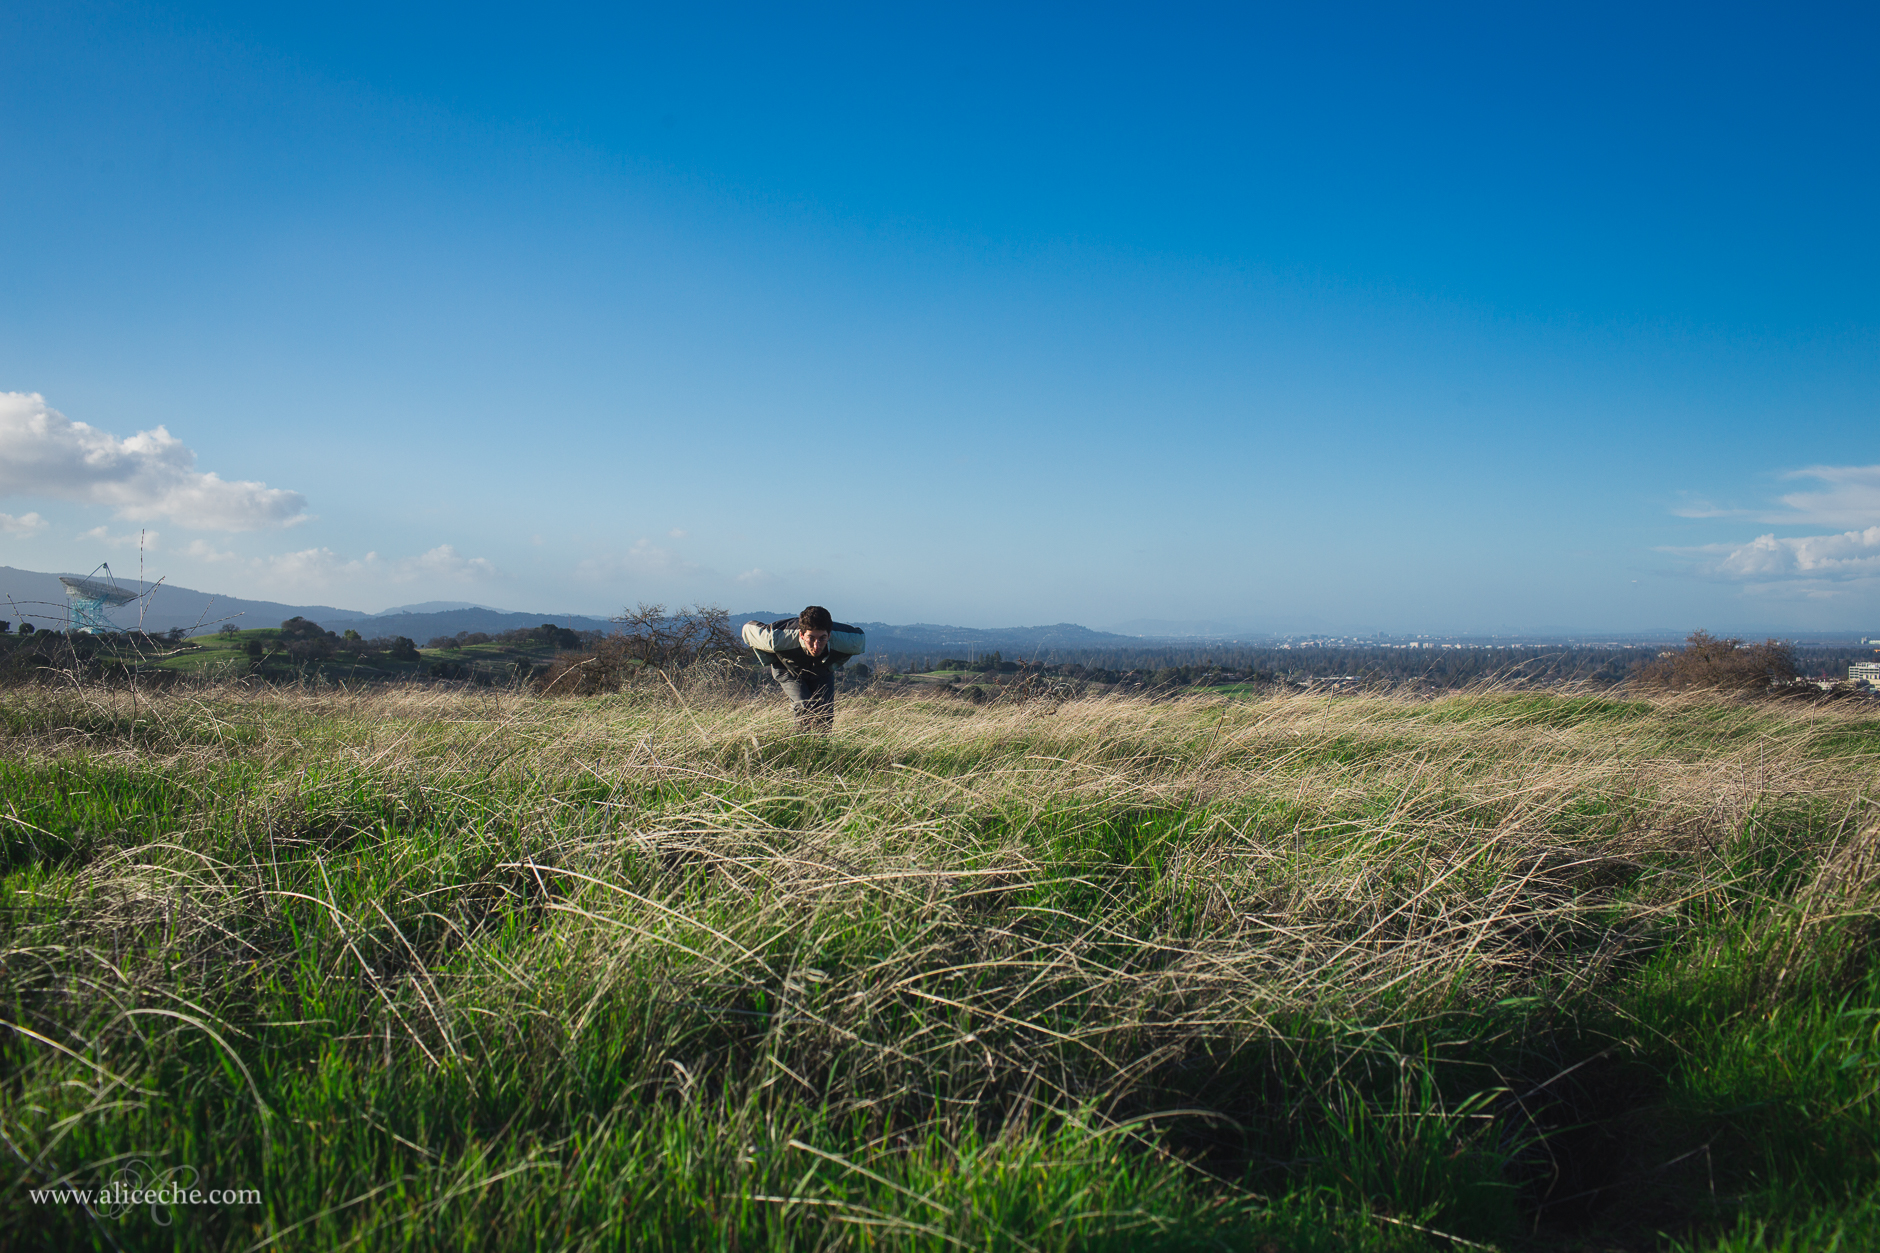 alice-che-photography-stanford-dish-goofy-guy-hiding-in-grass